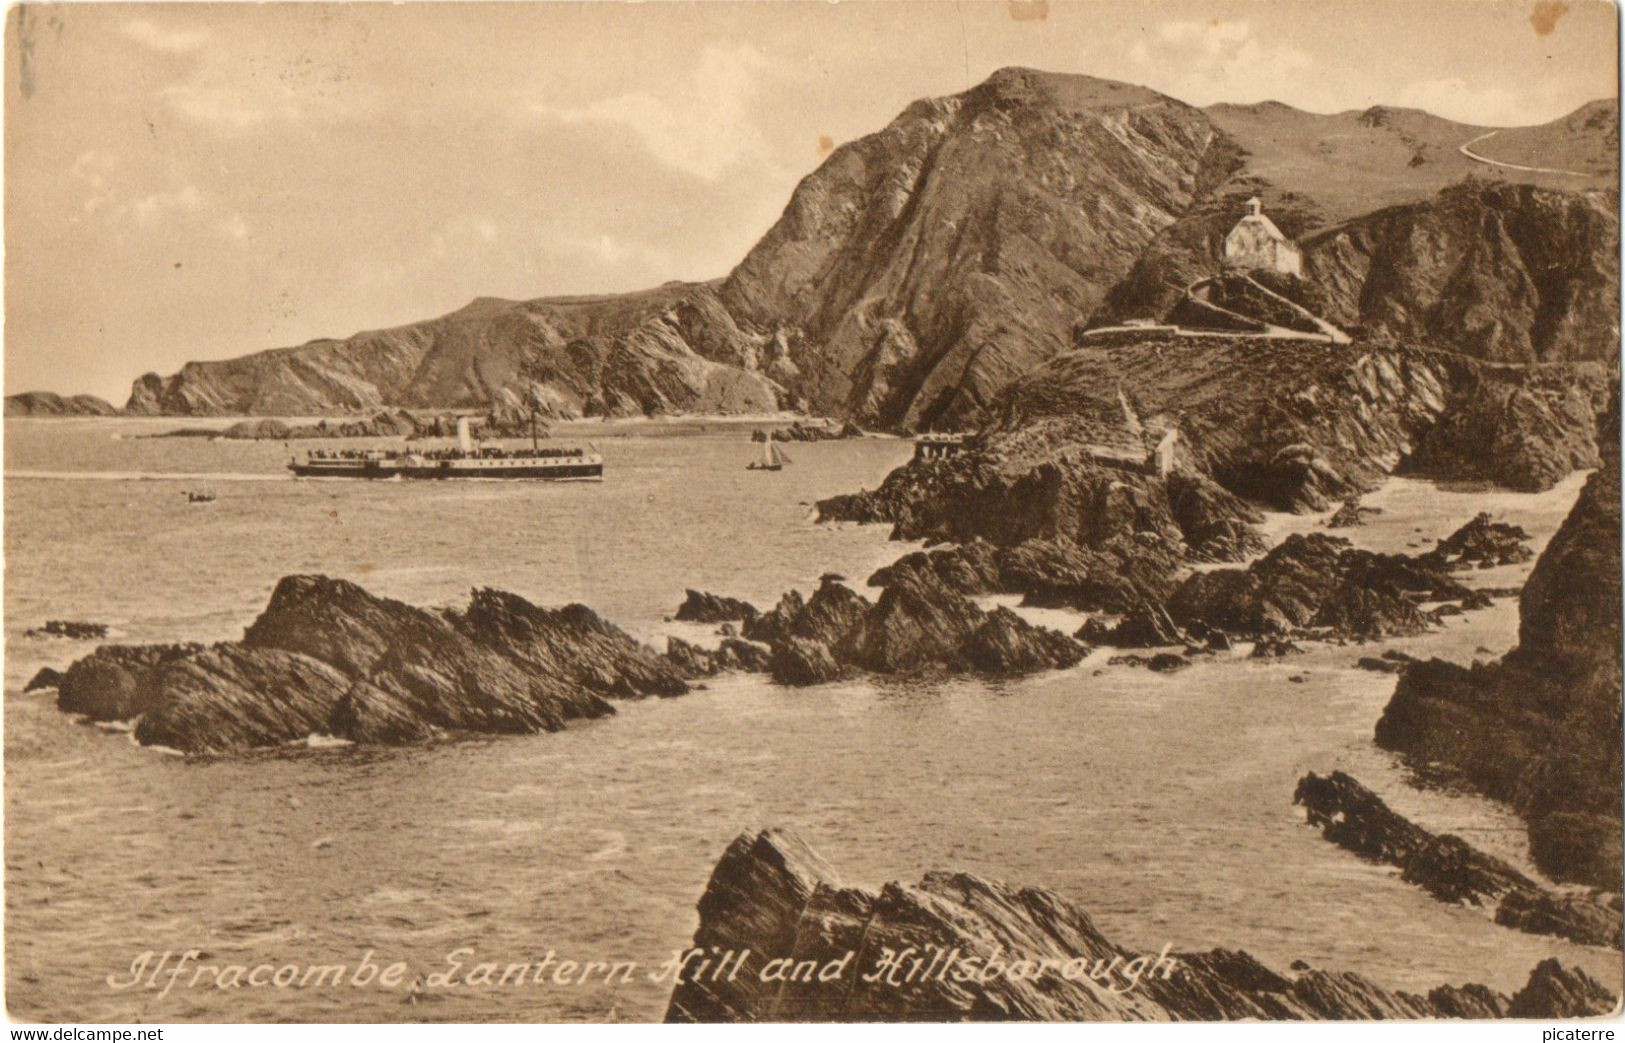 ILFRACOMBE, Lantern Hill & Hillsborough-Old Paddle Steamer Heading In From Bristol Channel Trips Poss.c1920s-Frith & Co - Ilfracombe